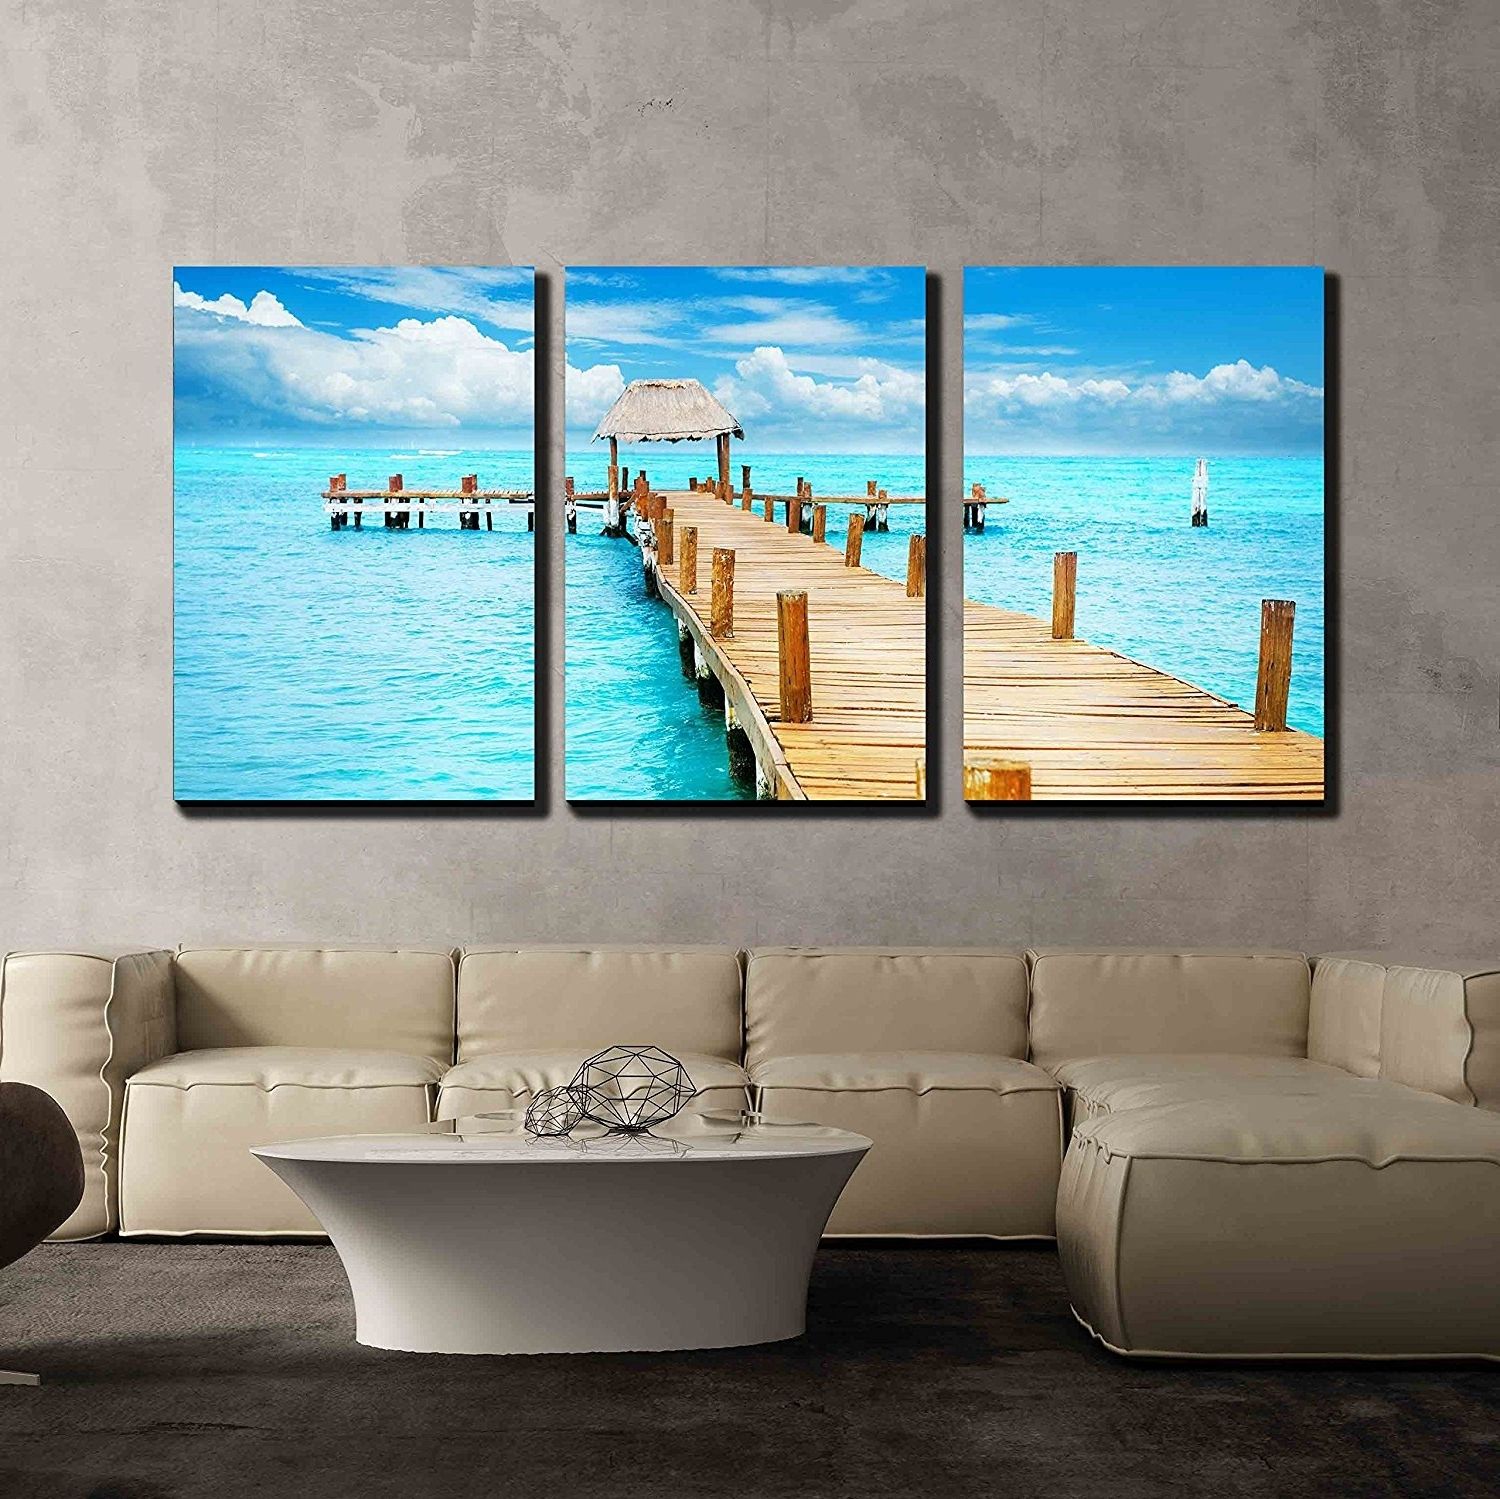 Latest Wall26 – Art Prints – Framed Art – Canvas Prints – Greeting With Regard To Canvas Landscape Wall Art (View 15 of 15)